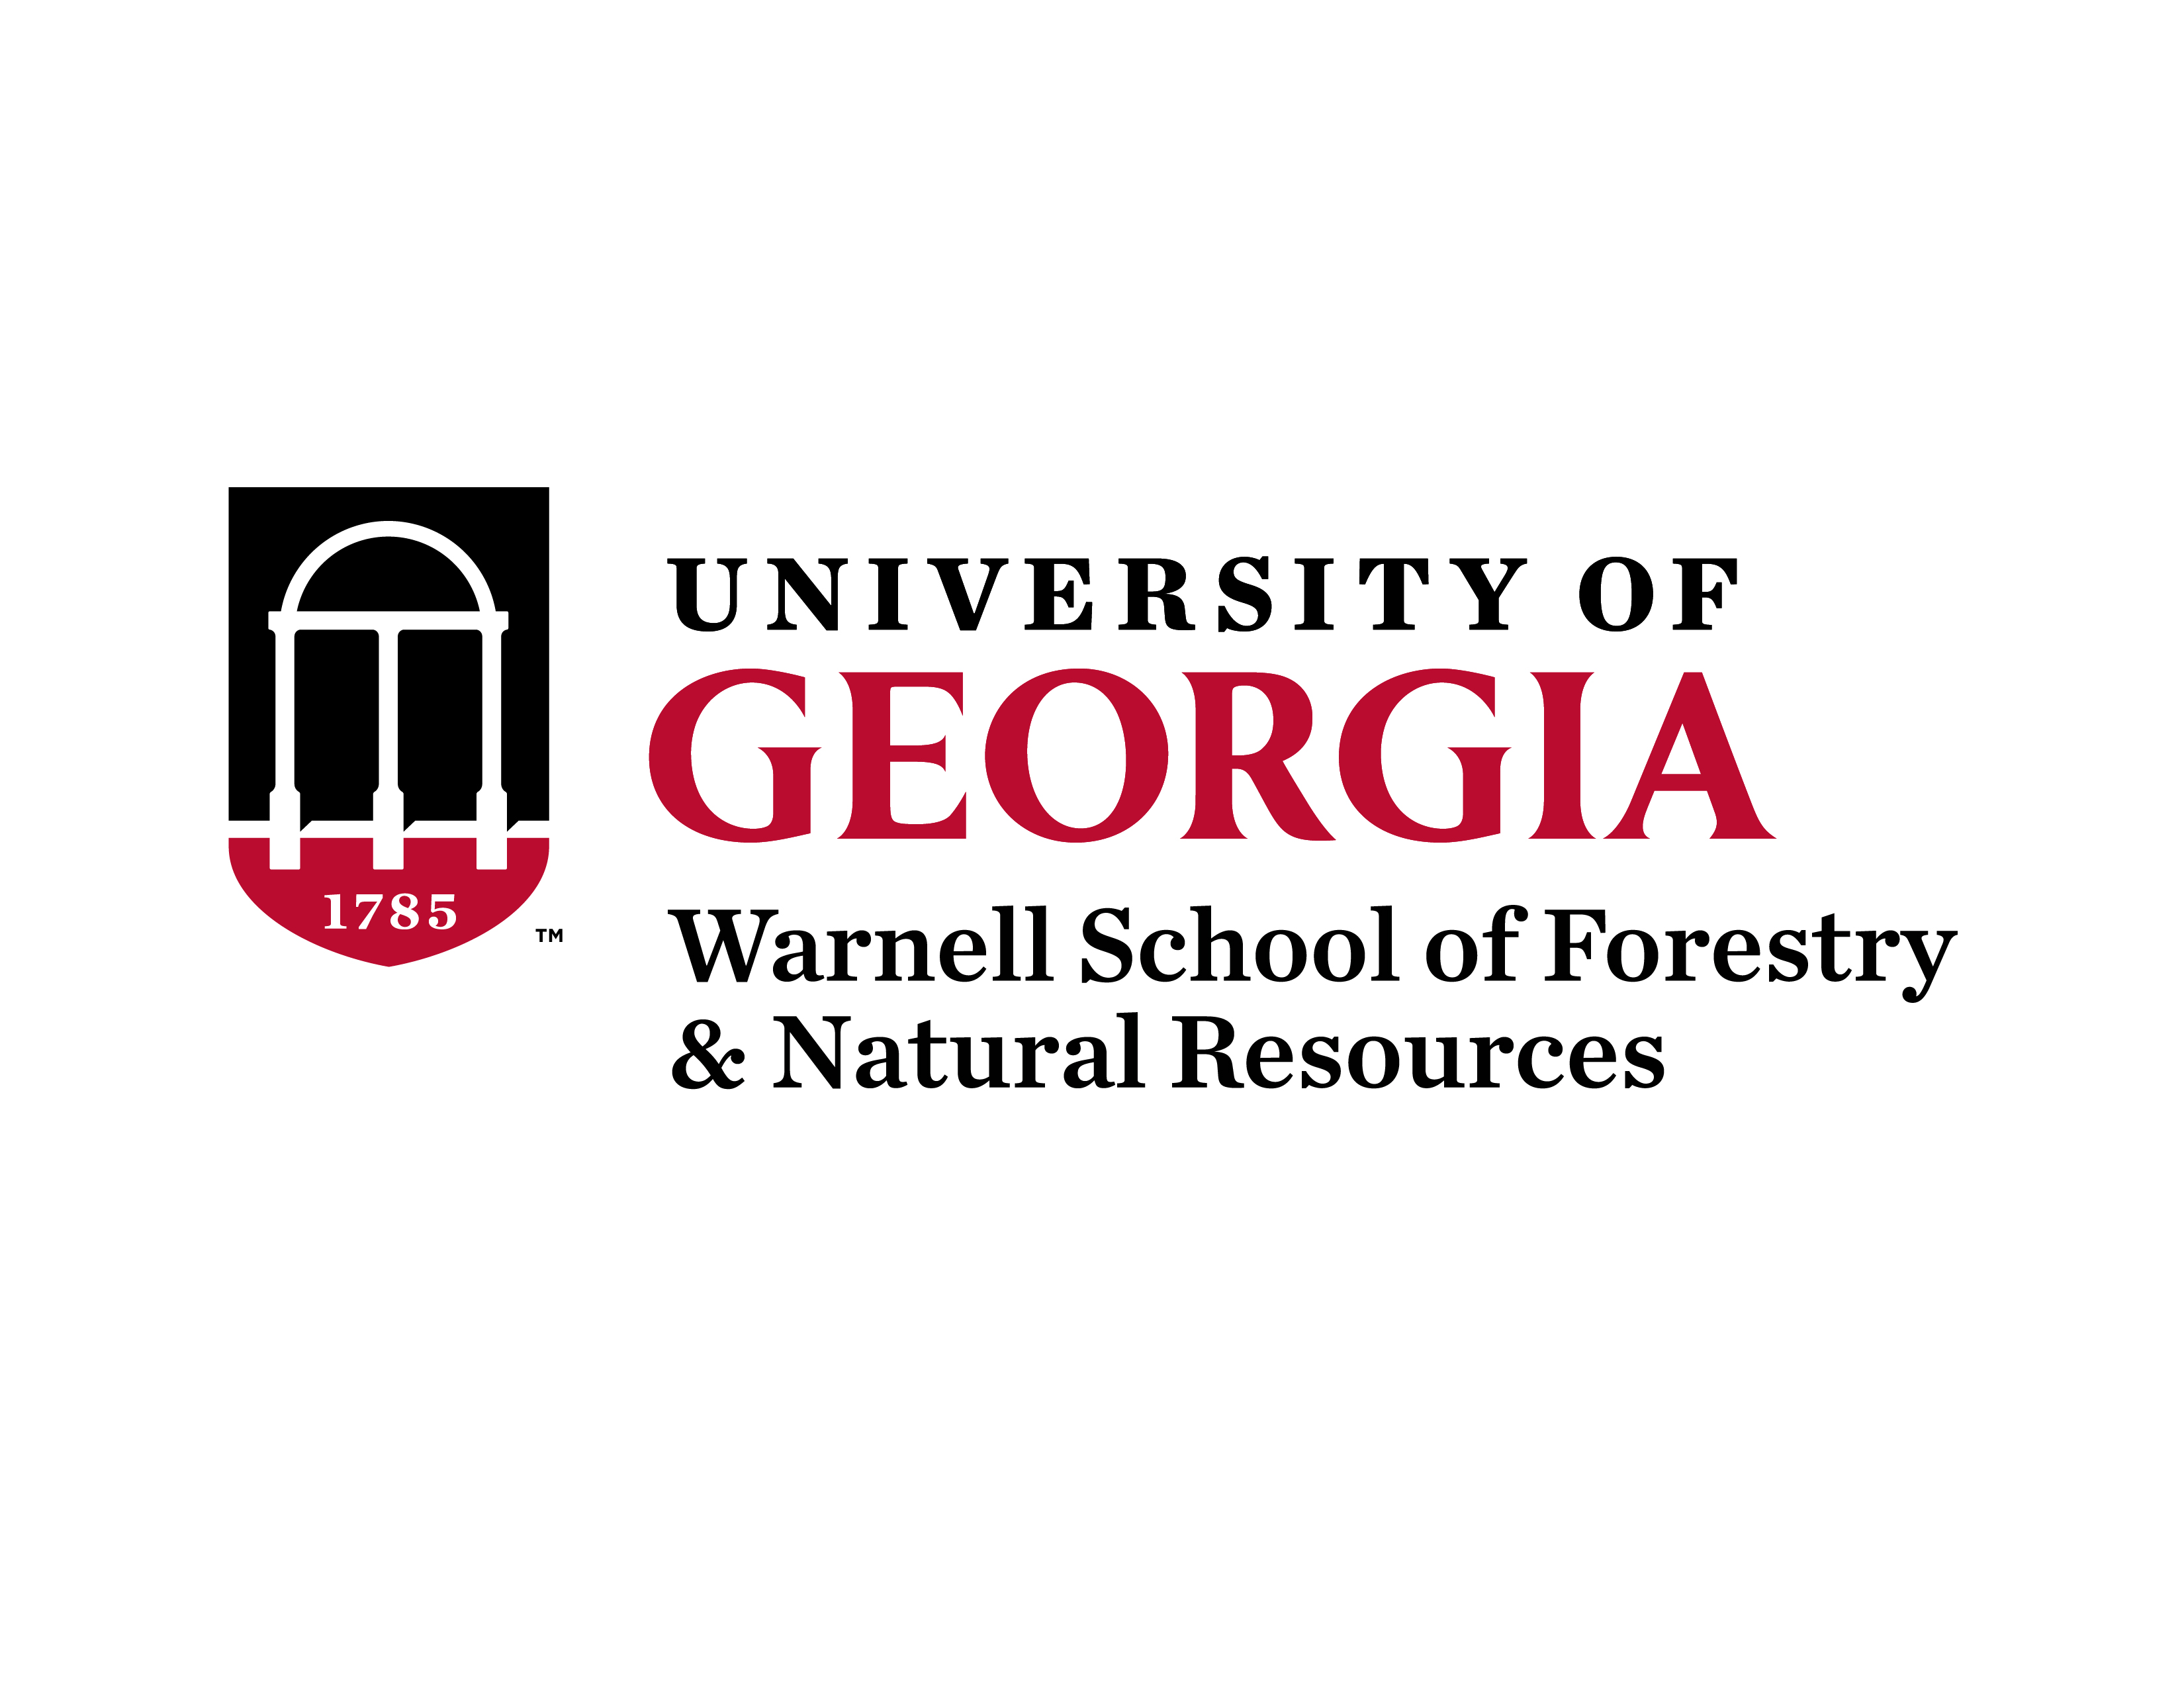 University of Georgia - Warnell School of Forestry and Natural Resources Logo